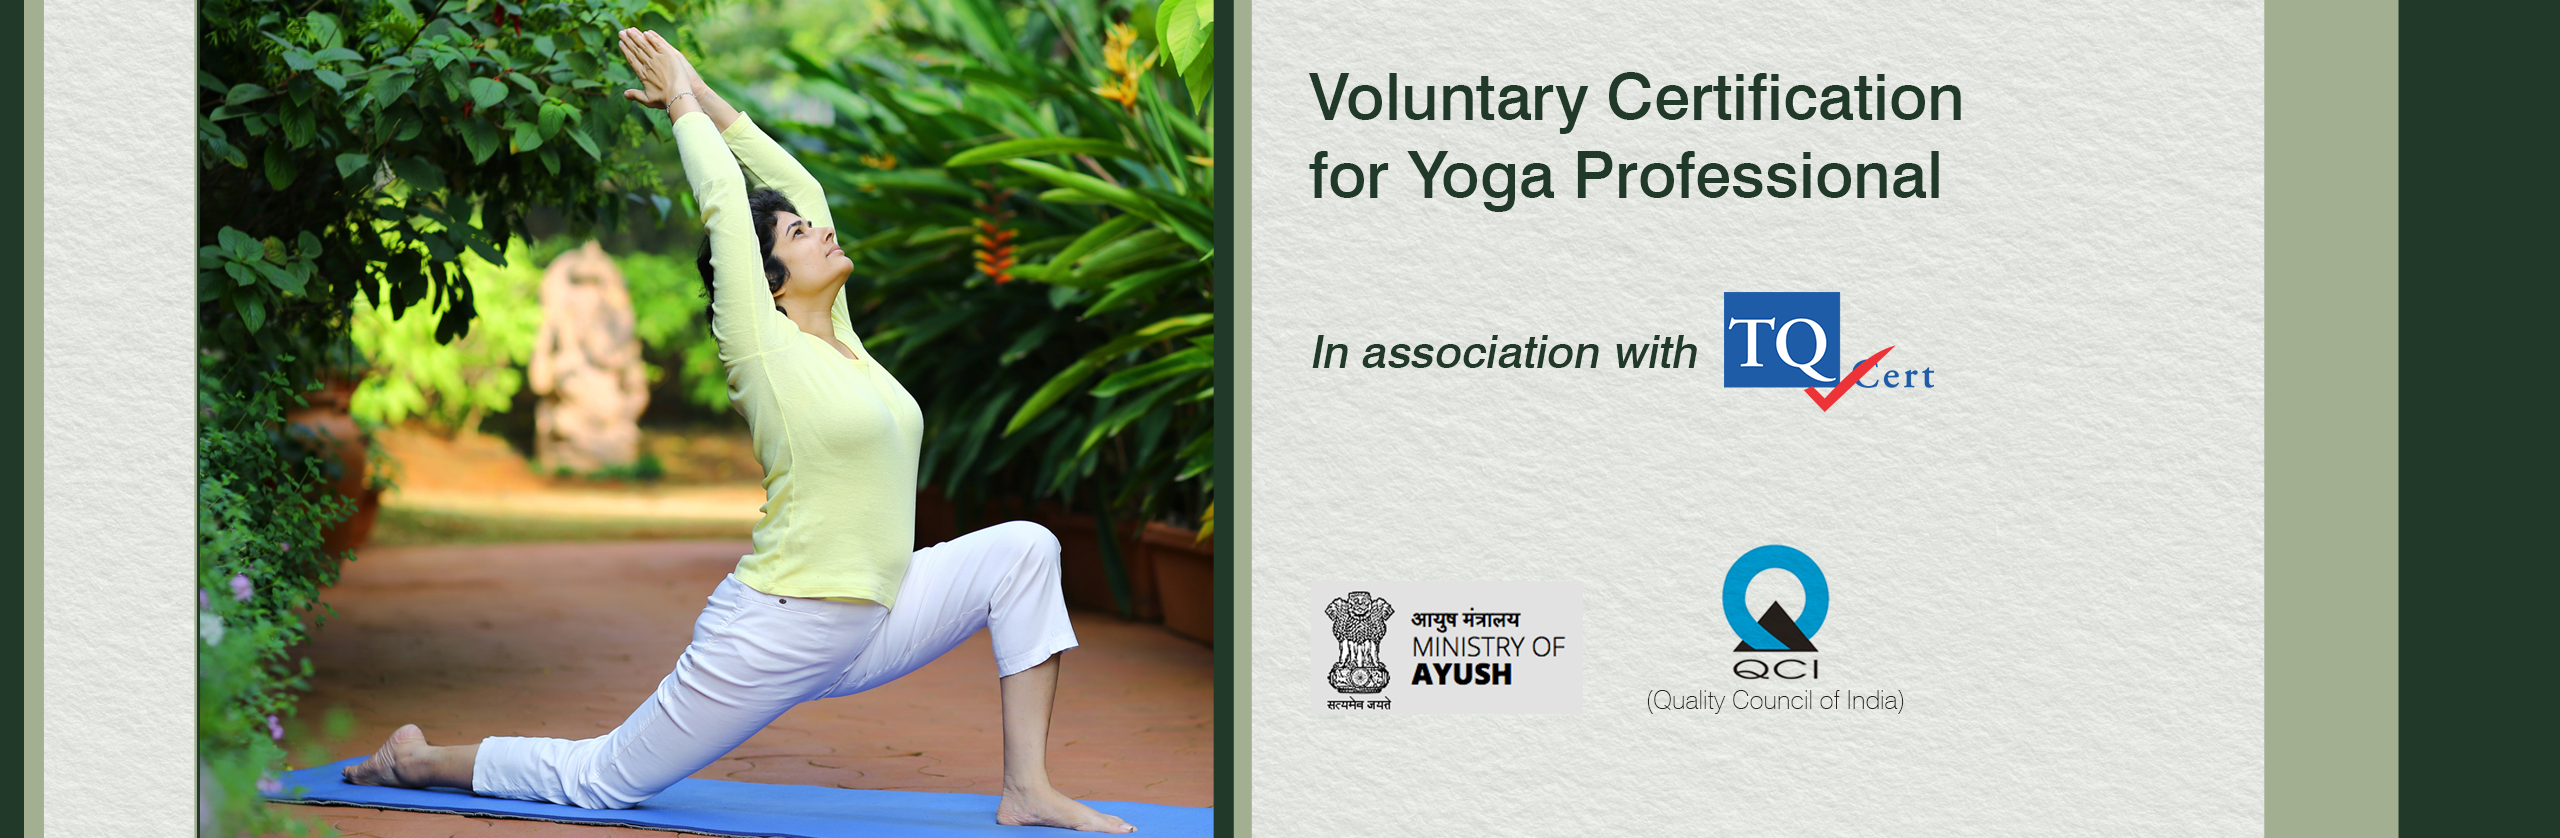 Yoga certification with TQCert, QCI and Ministry of AYUSH at Yogalaya Pune